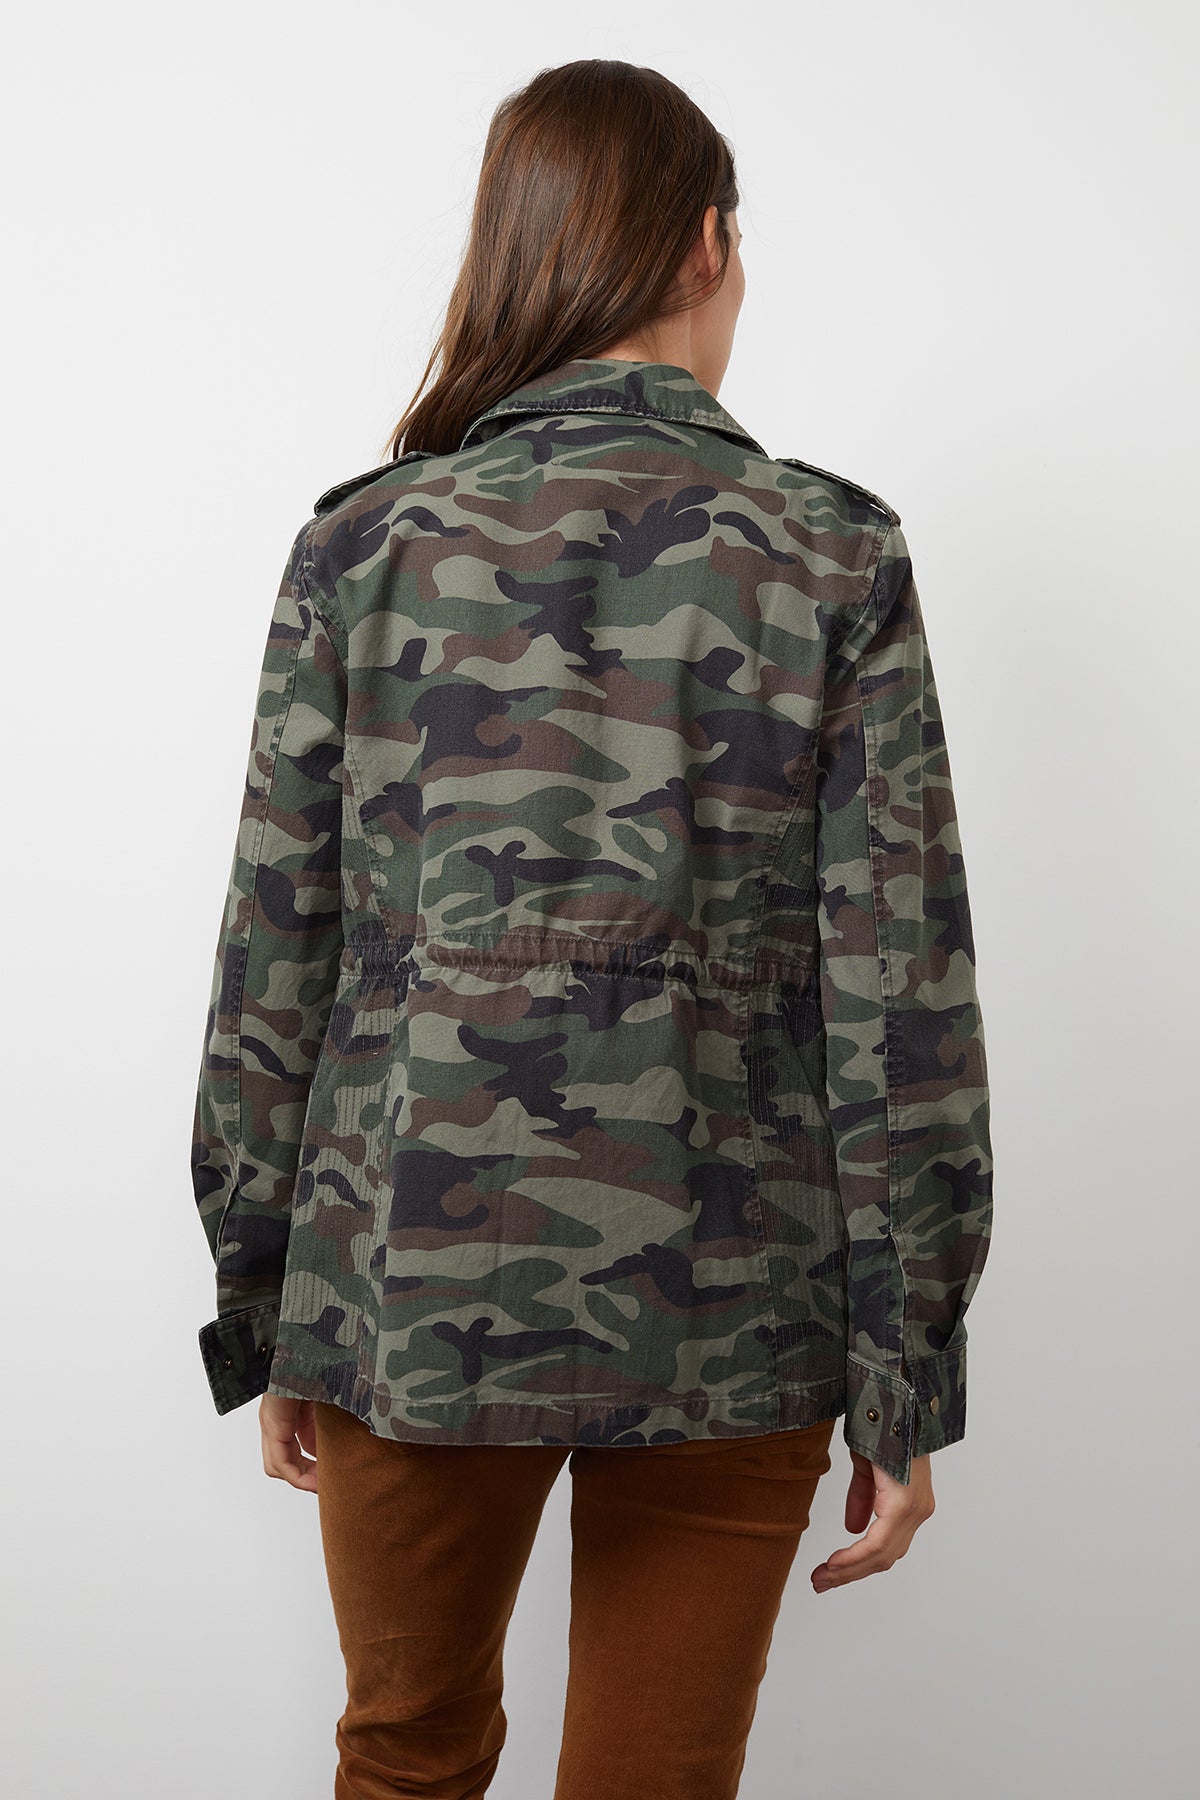 The back view of a woman wearing a Velvet by Graham & Spencer RUBY LIGHT-WEIGHT ARMY JACKET.-22115424534721